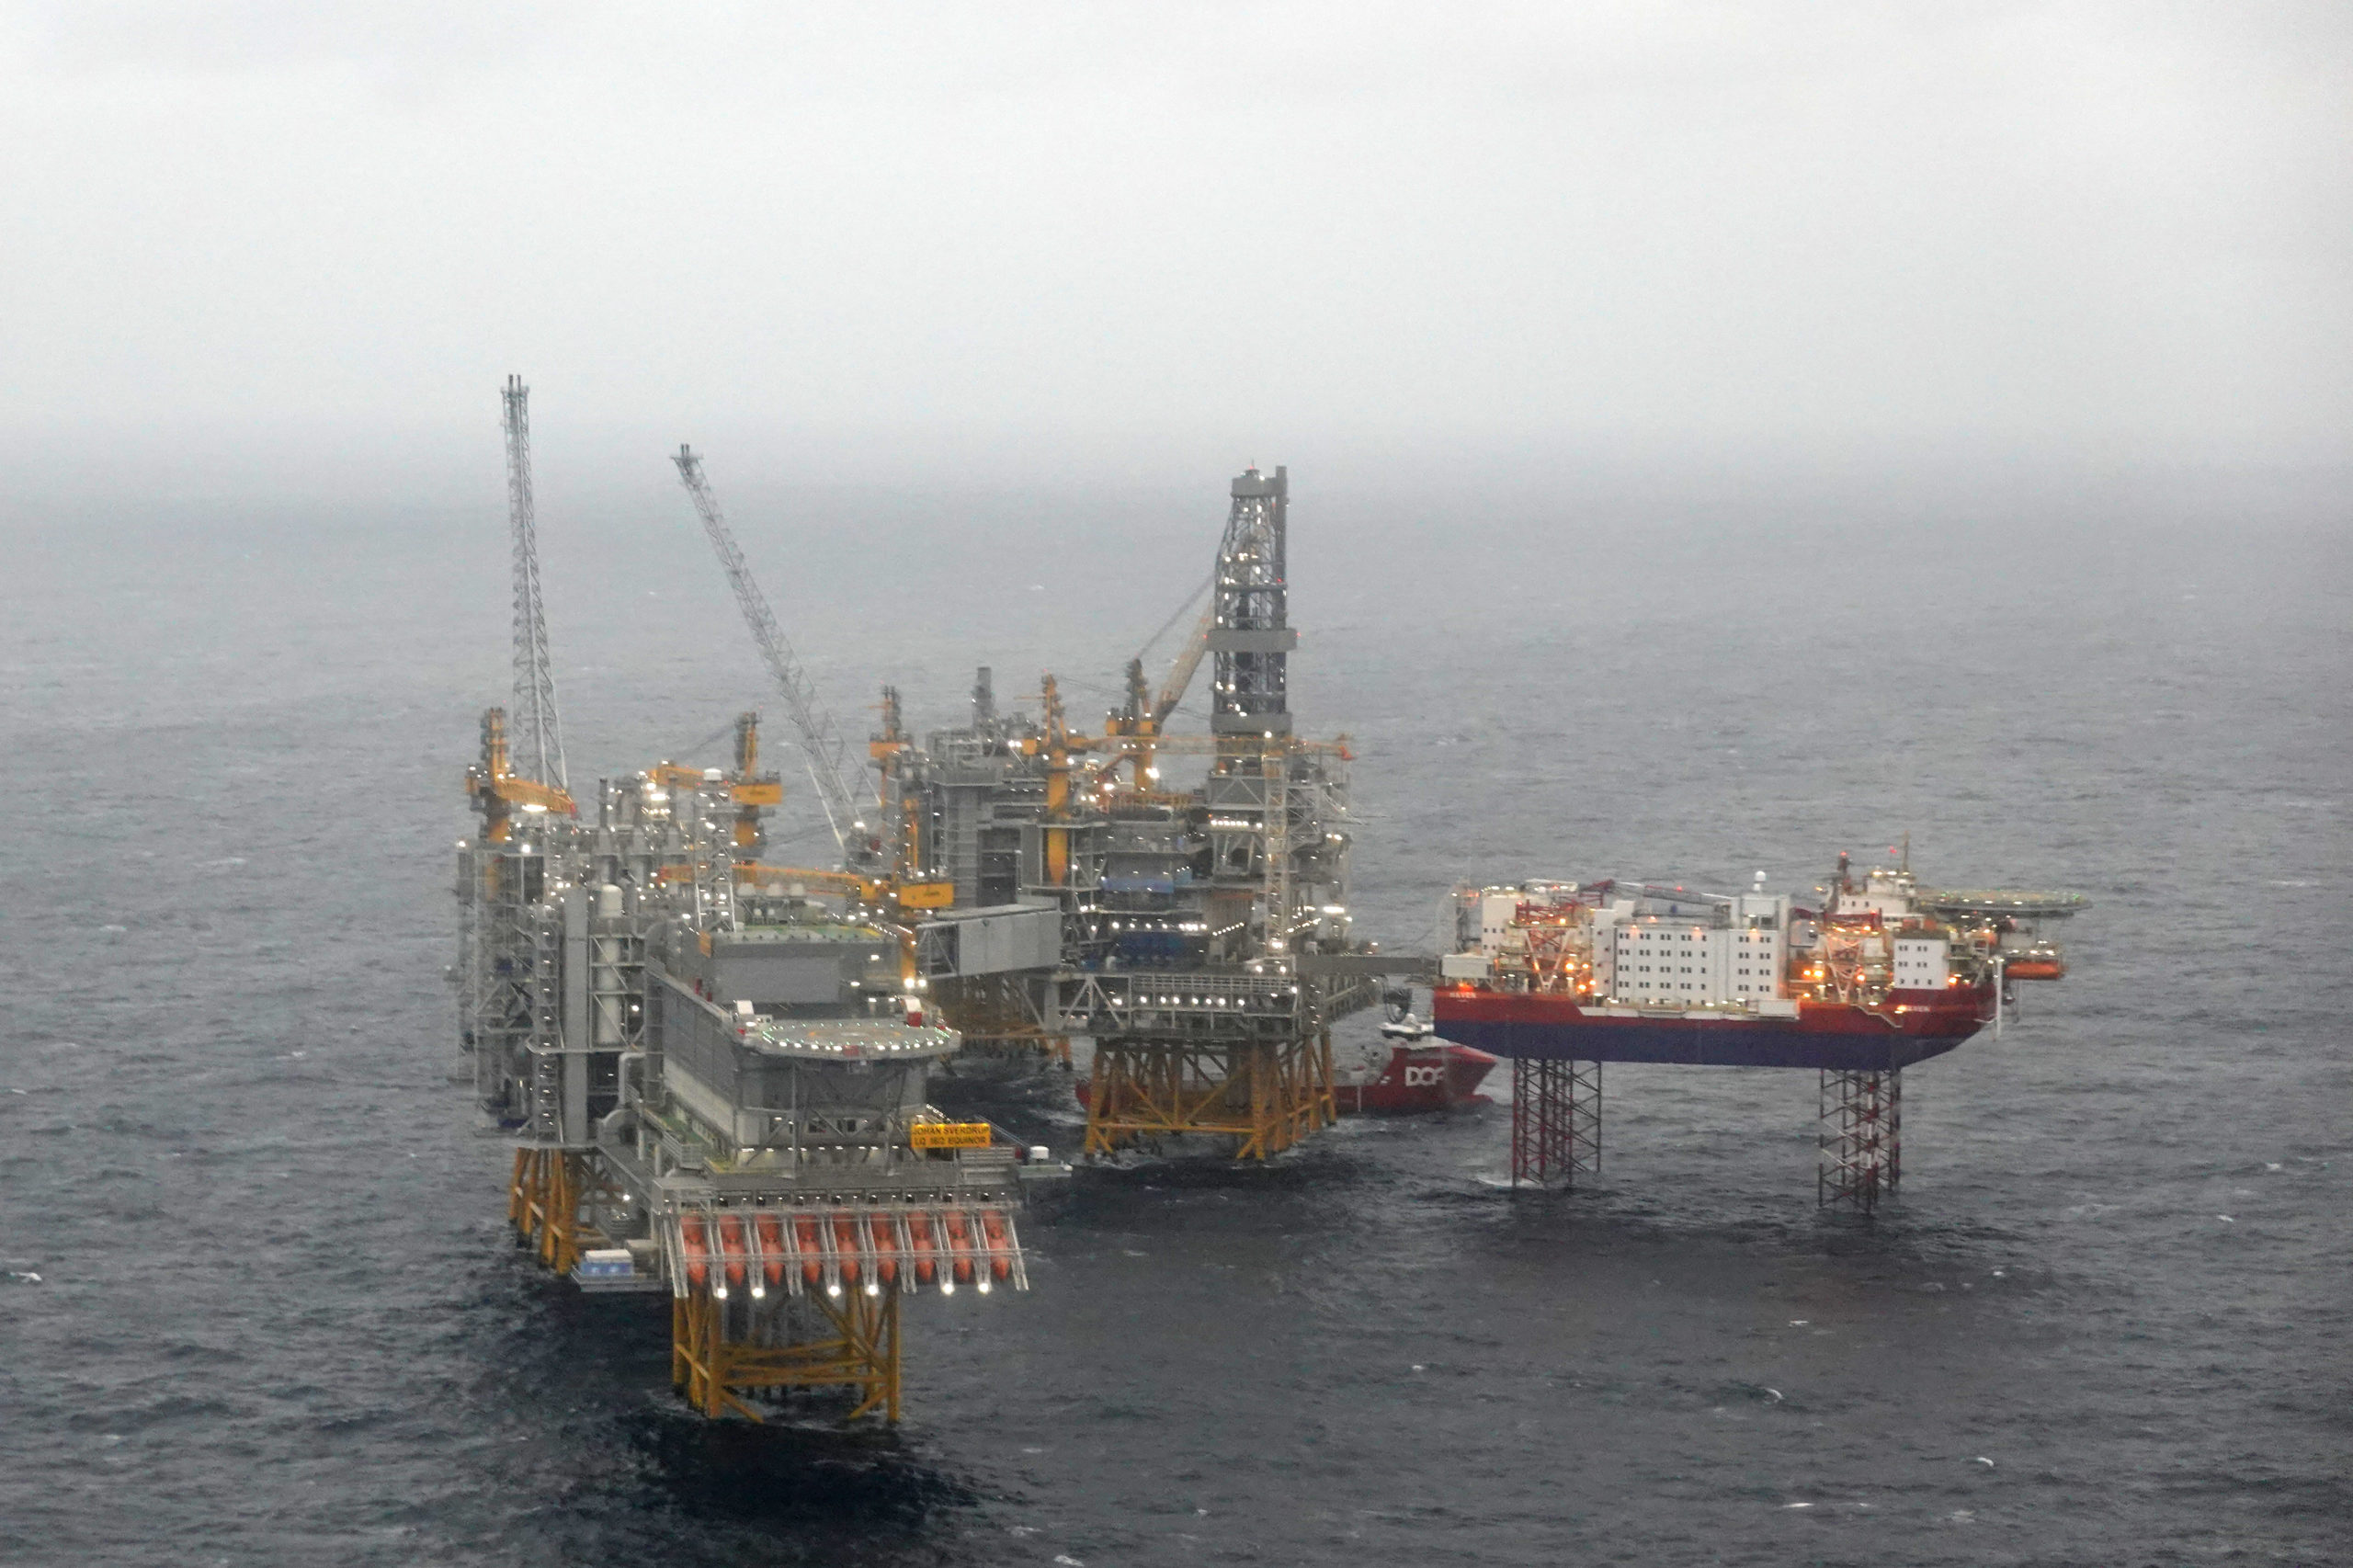 Norway’s oil industry goes for CO2-neutrality by 2050